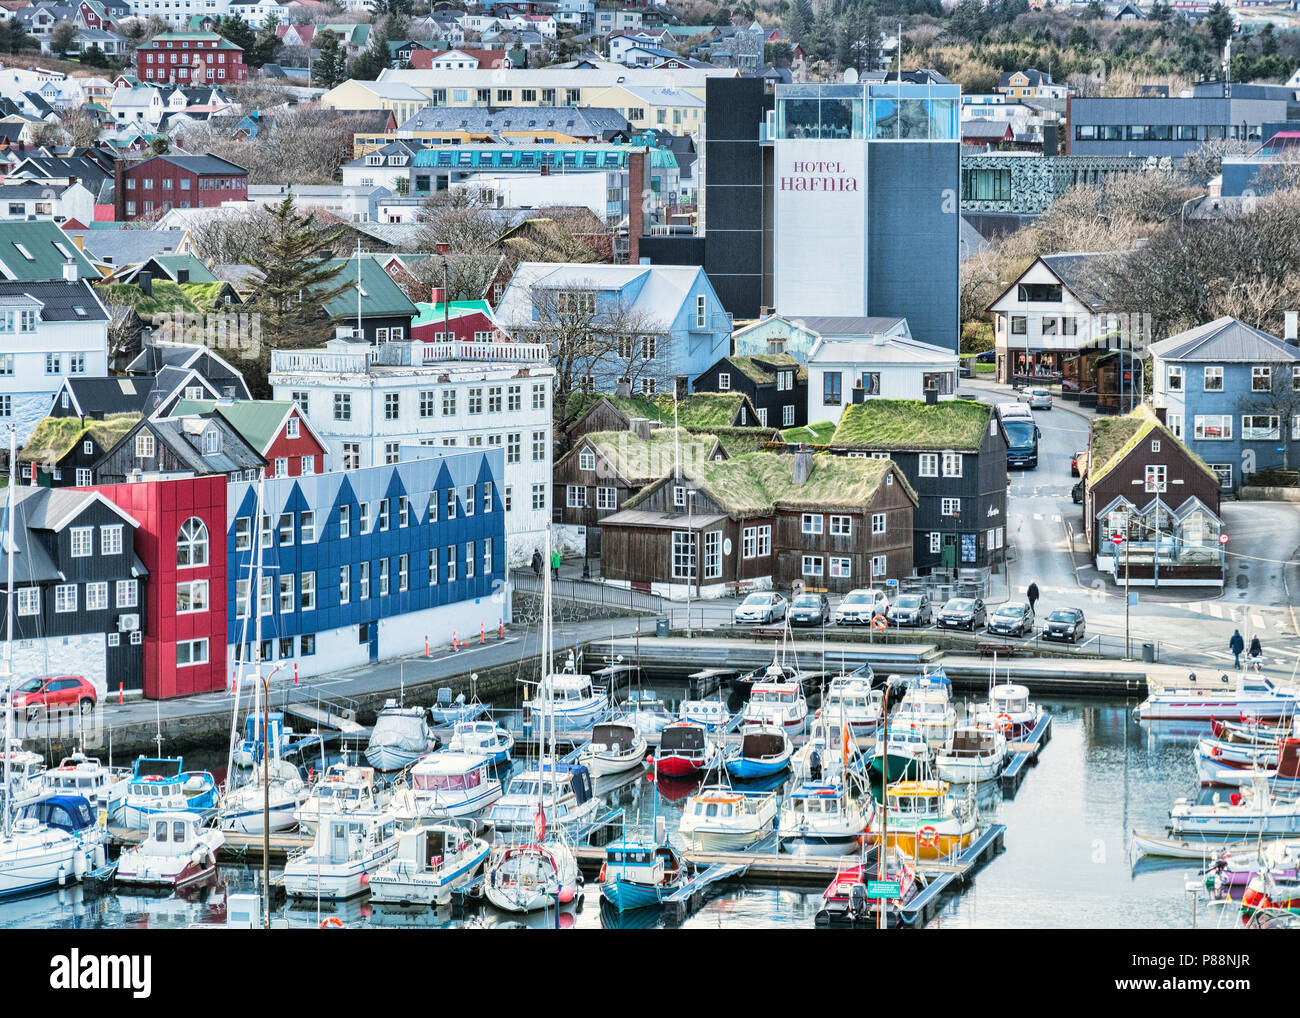 26 April 2018: Torshavn, Faroe Islands - The harbour, traditional grass roofed houses and the Hotel Hafnia in the town centre. Stock Photo